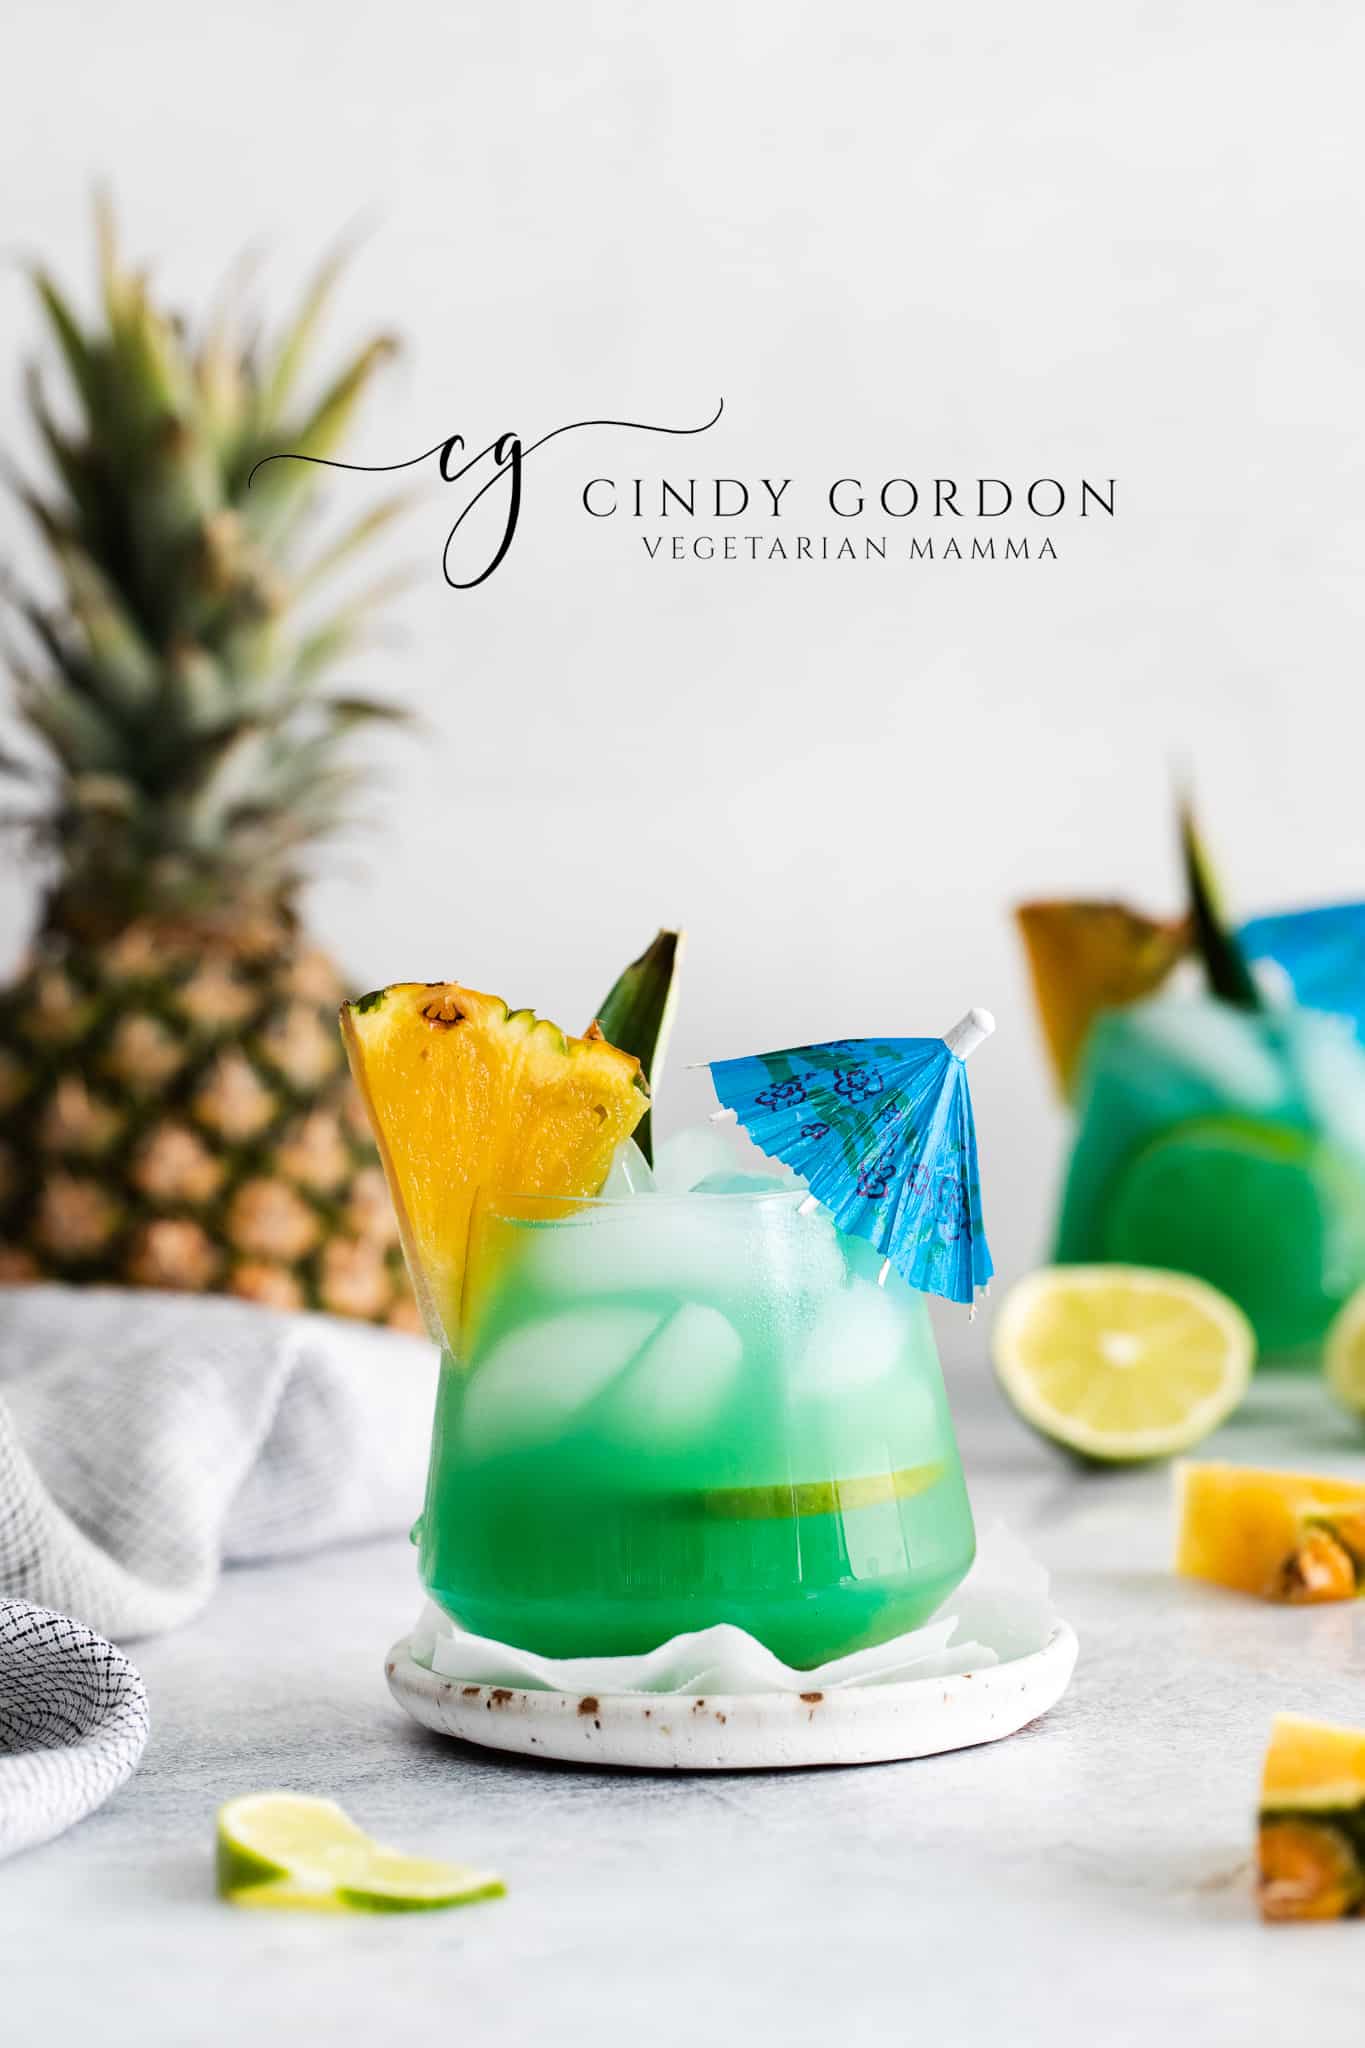 Pictured is two short glasses of mermaid water drink. The glasses are full of a blue green liquid with ice cubes. There is a pineapple chunk on the side of the glasses. A large pineapple in the background and lime slices on the table also a small blue drink umbrella in the forward most drink